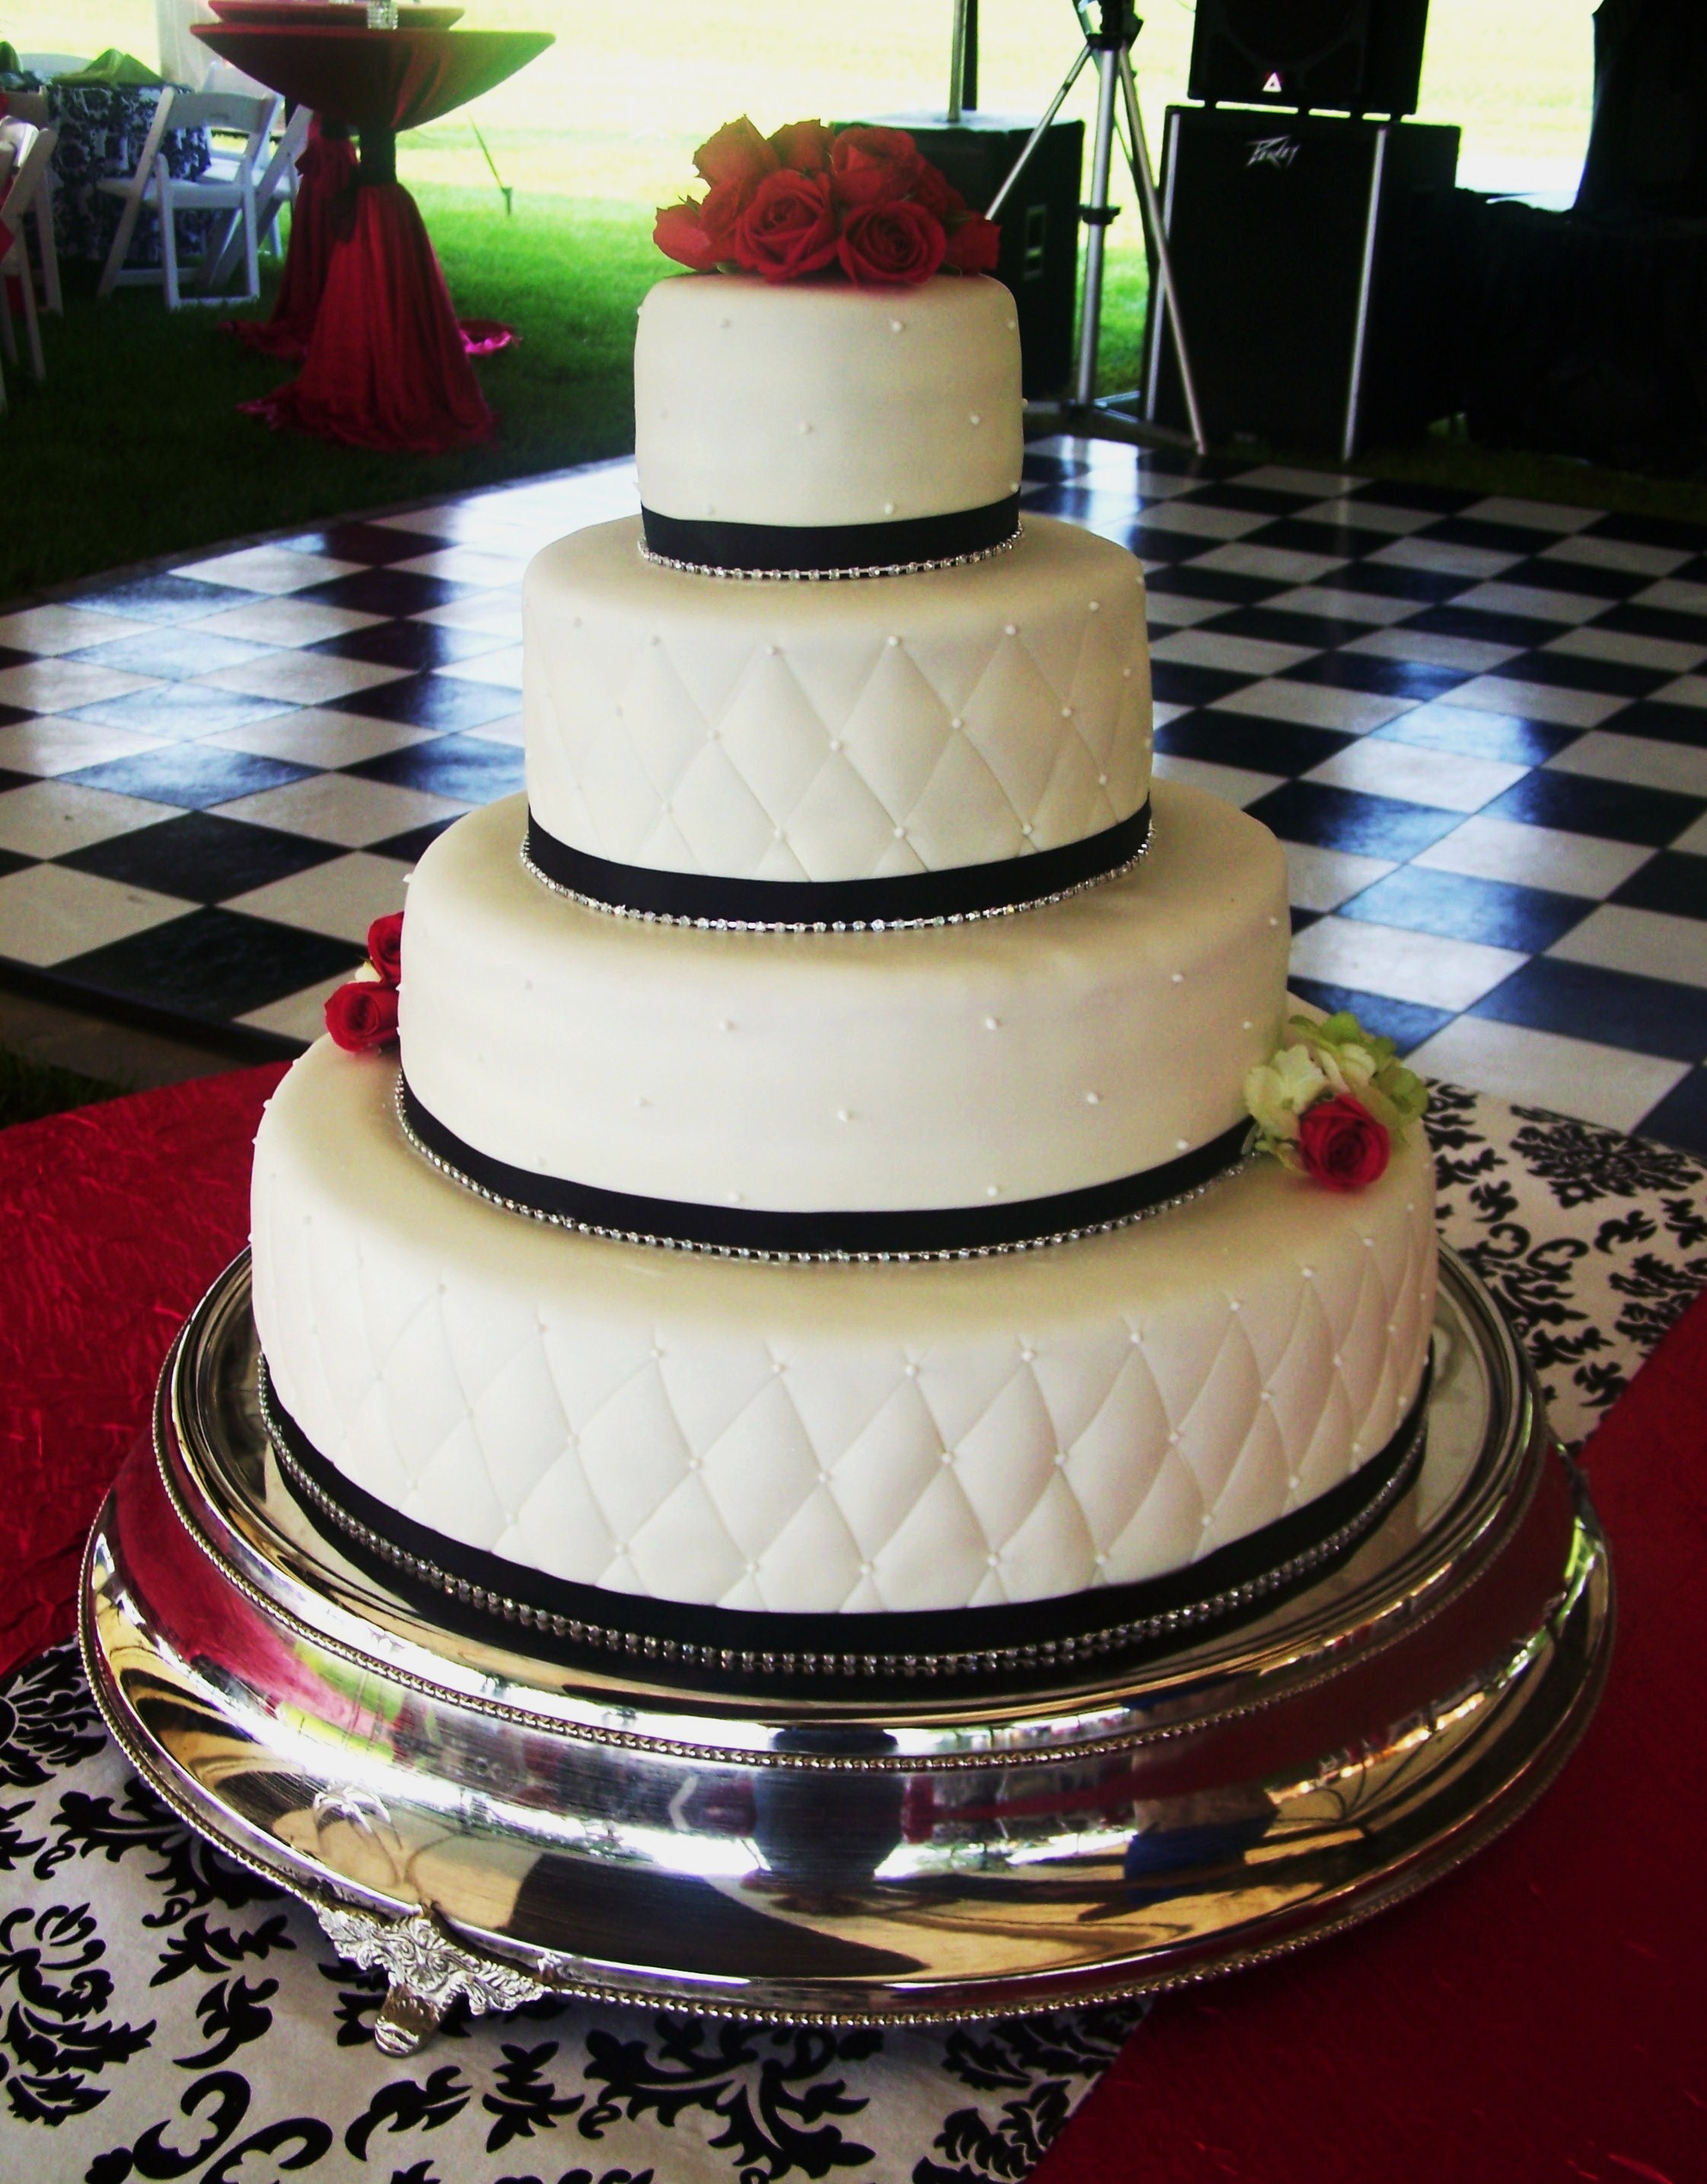 Black and White Wedding Cakes with Bling